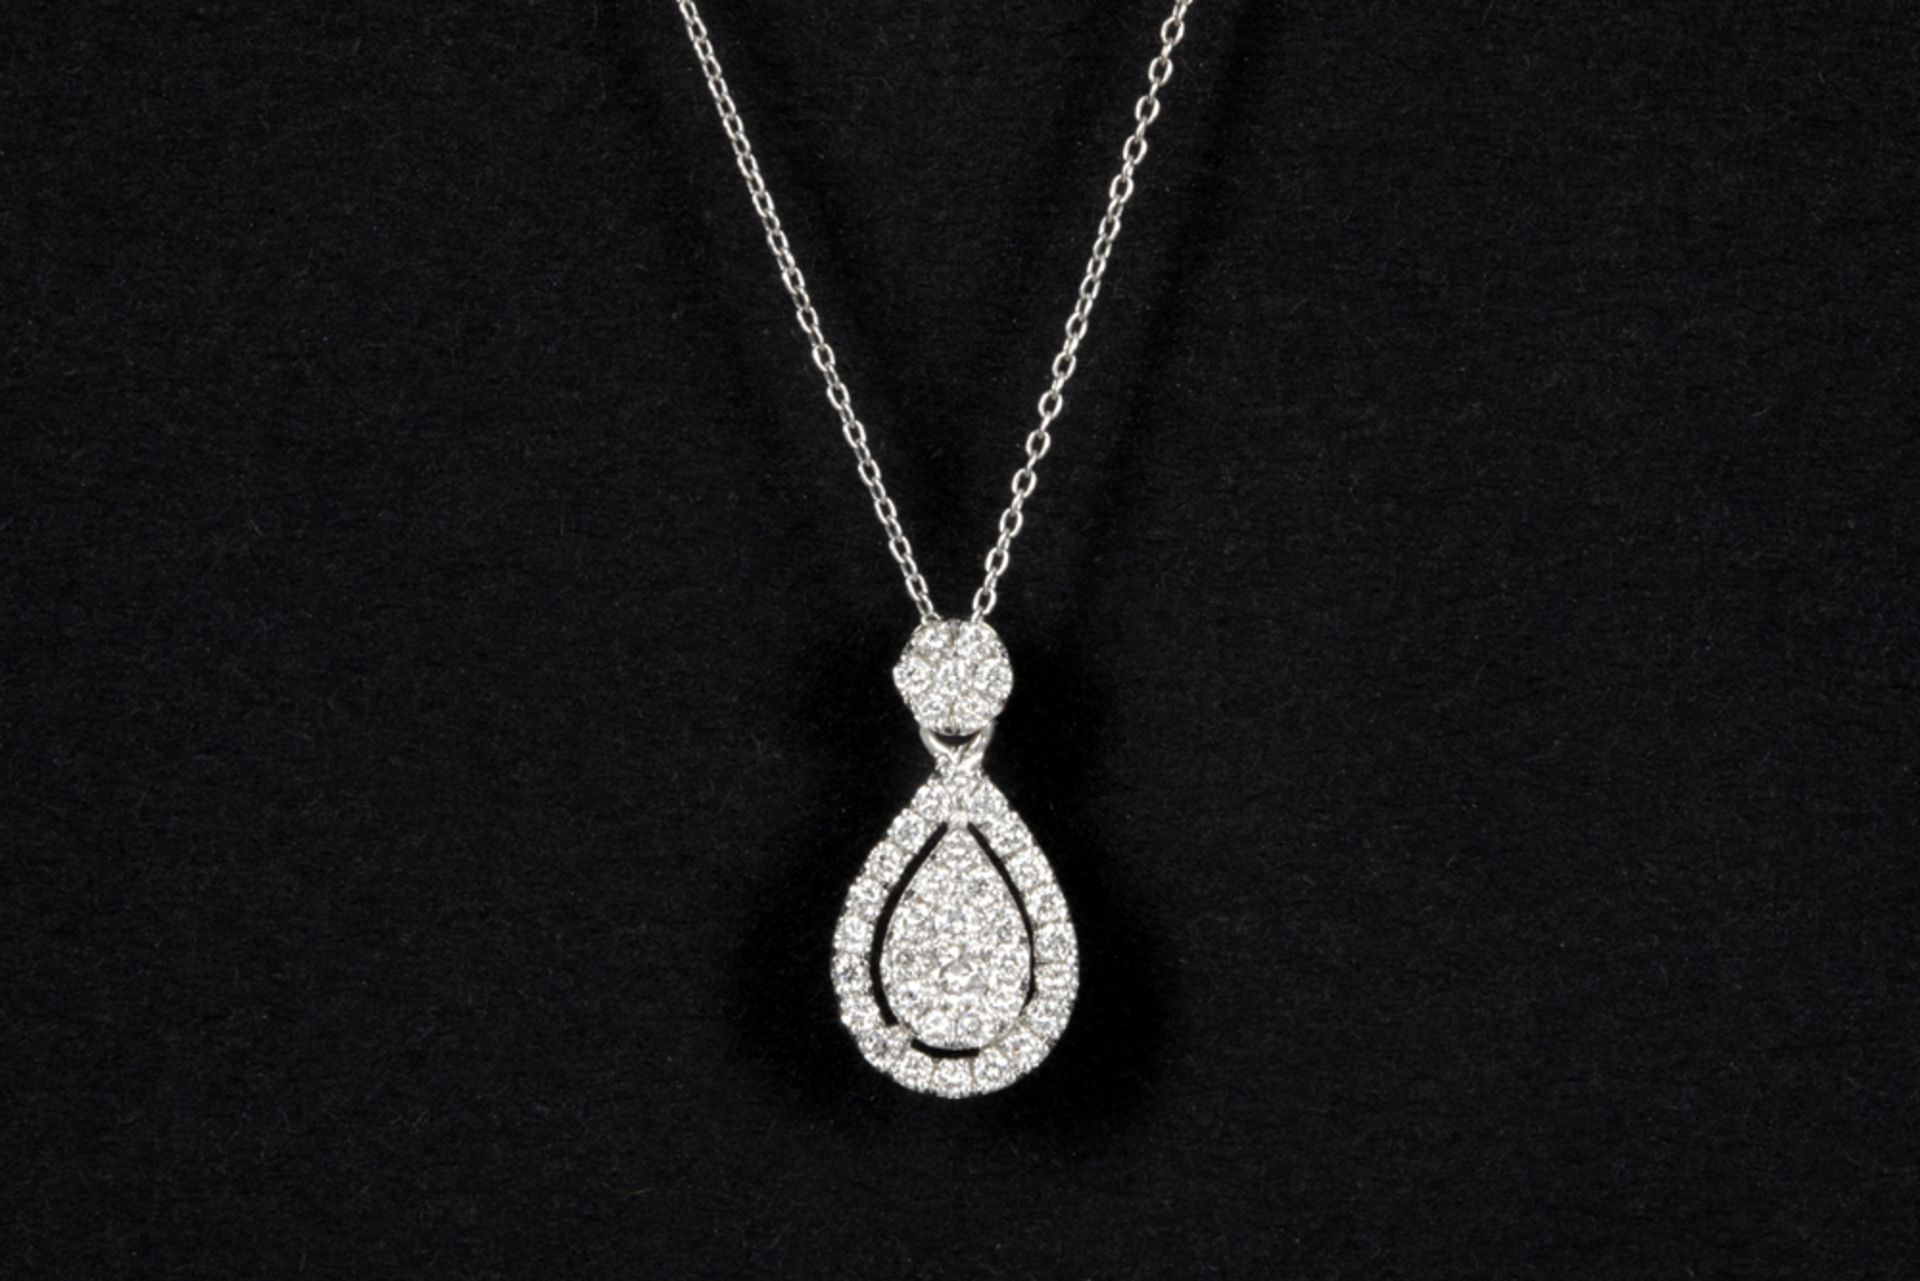 dropshaped pendant in white gold (18 carat) with ca 0,25 carat of high quality brilliant cut